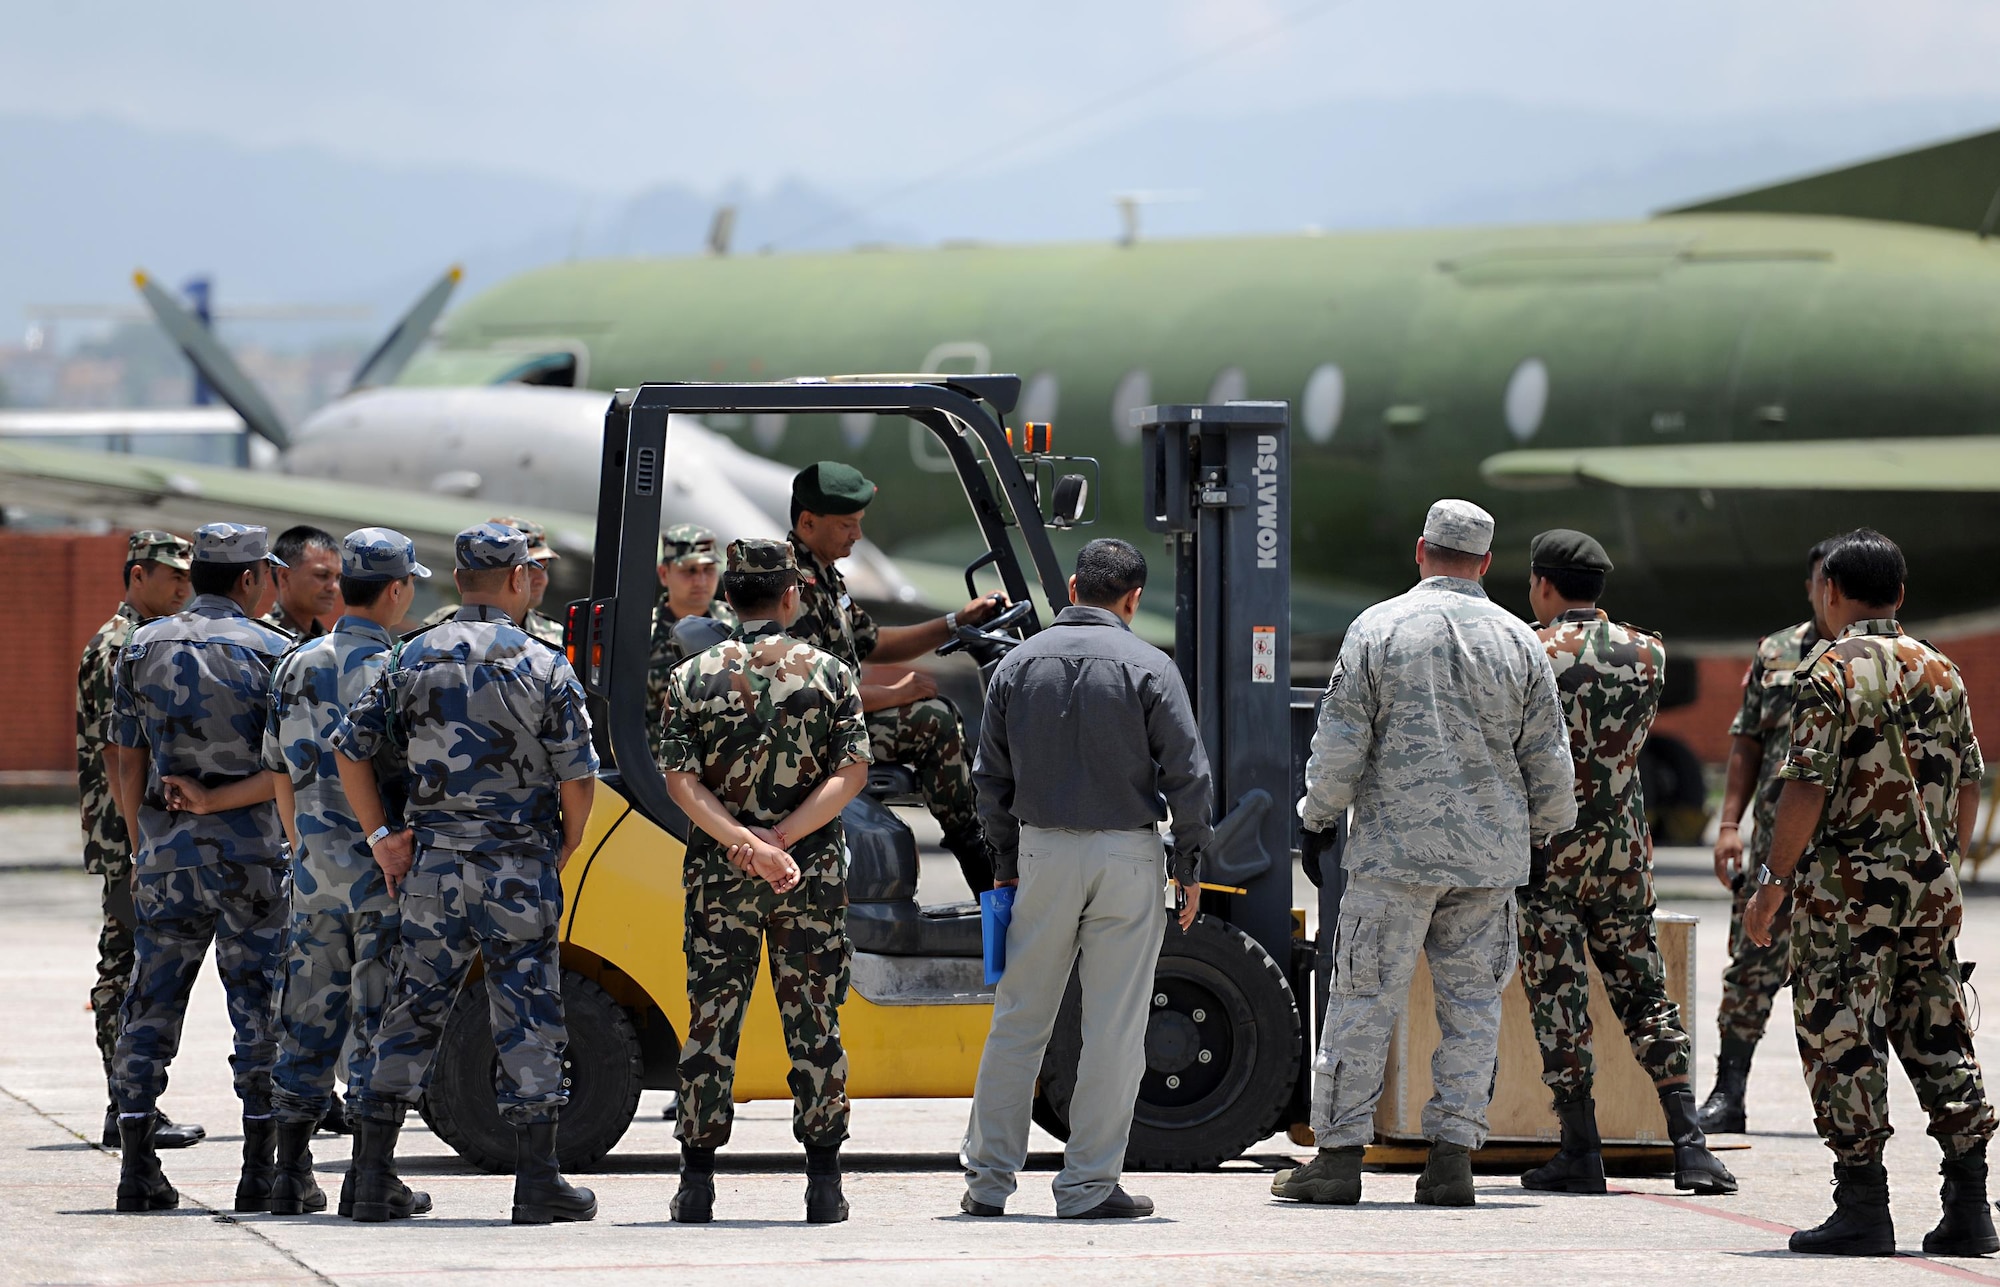 Participants of a subject-matter expert exchange on cargo handling learn how to operate a forklift June 28, 2016, at Tribhuvan International Airport in Kathmandu, Nepal. During the SMEE, participants familiarized themselves with forklift operation and learned cargo transportation techniques. (U.S. Air Force photo by Staff Sgt. Benjamin Gonsier/Released)
